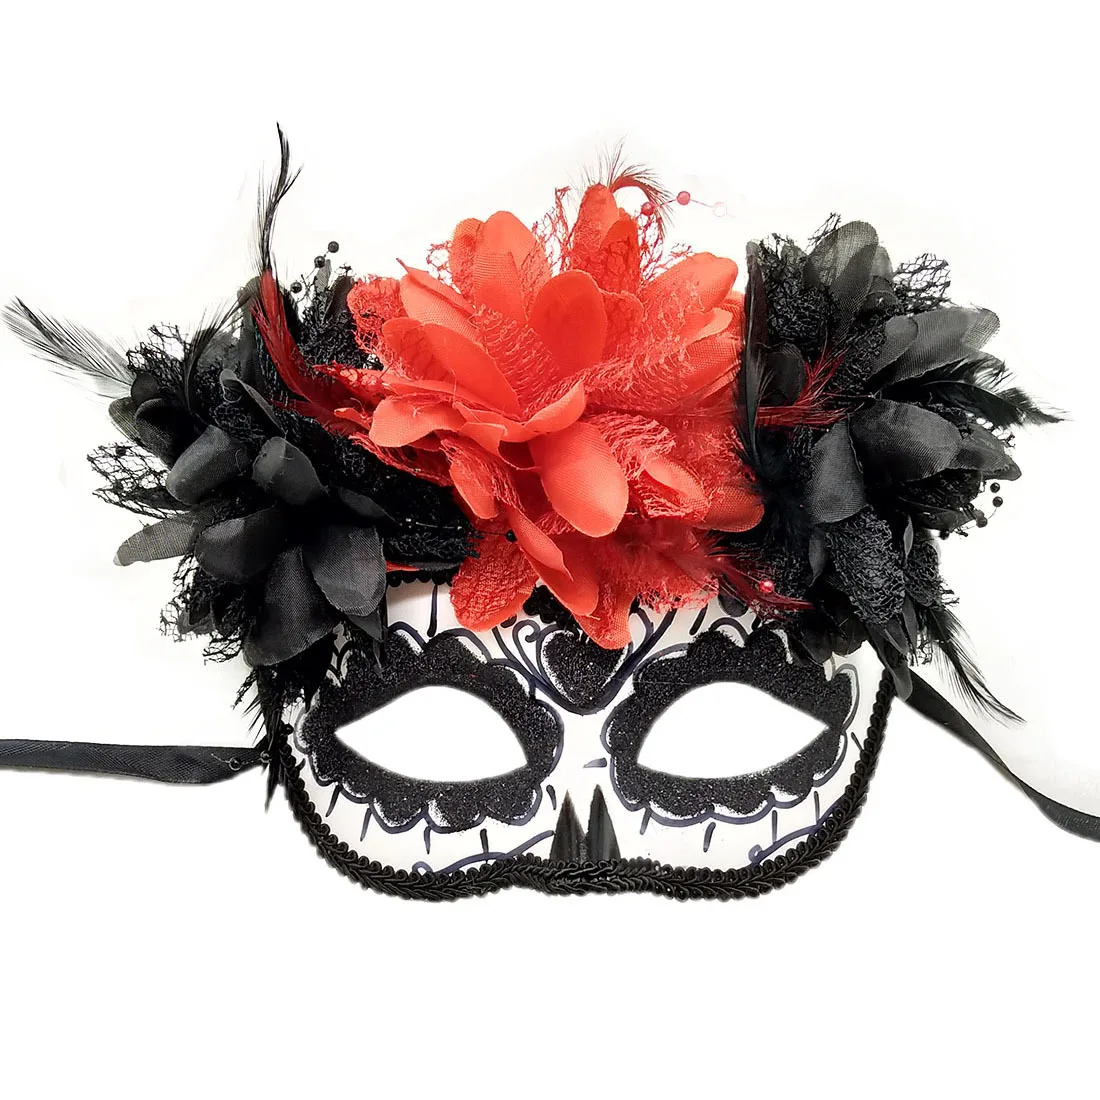 

Mexican Day of the Dead Masquerade Ball Mask Halloween with Floral Ghost Half Face Mask Cosplay Performance Rave Party